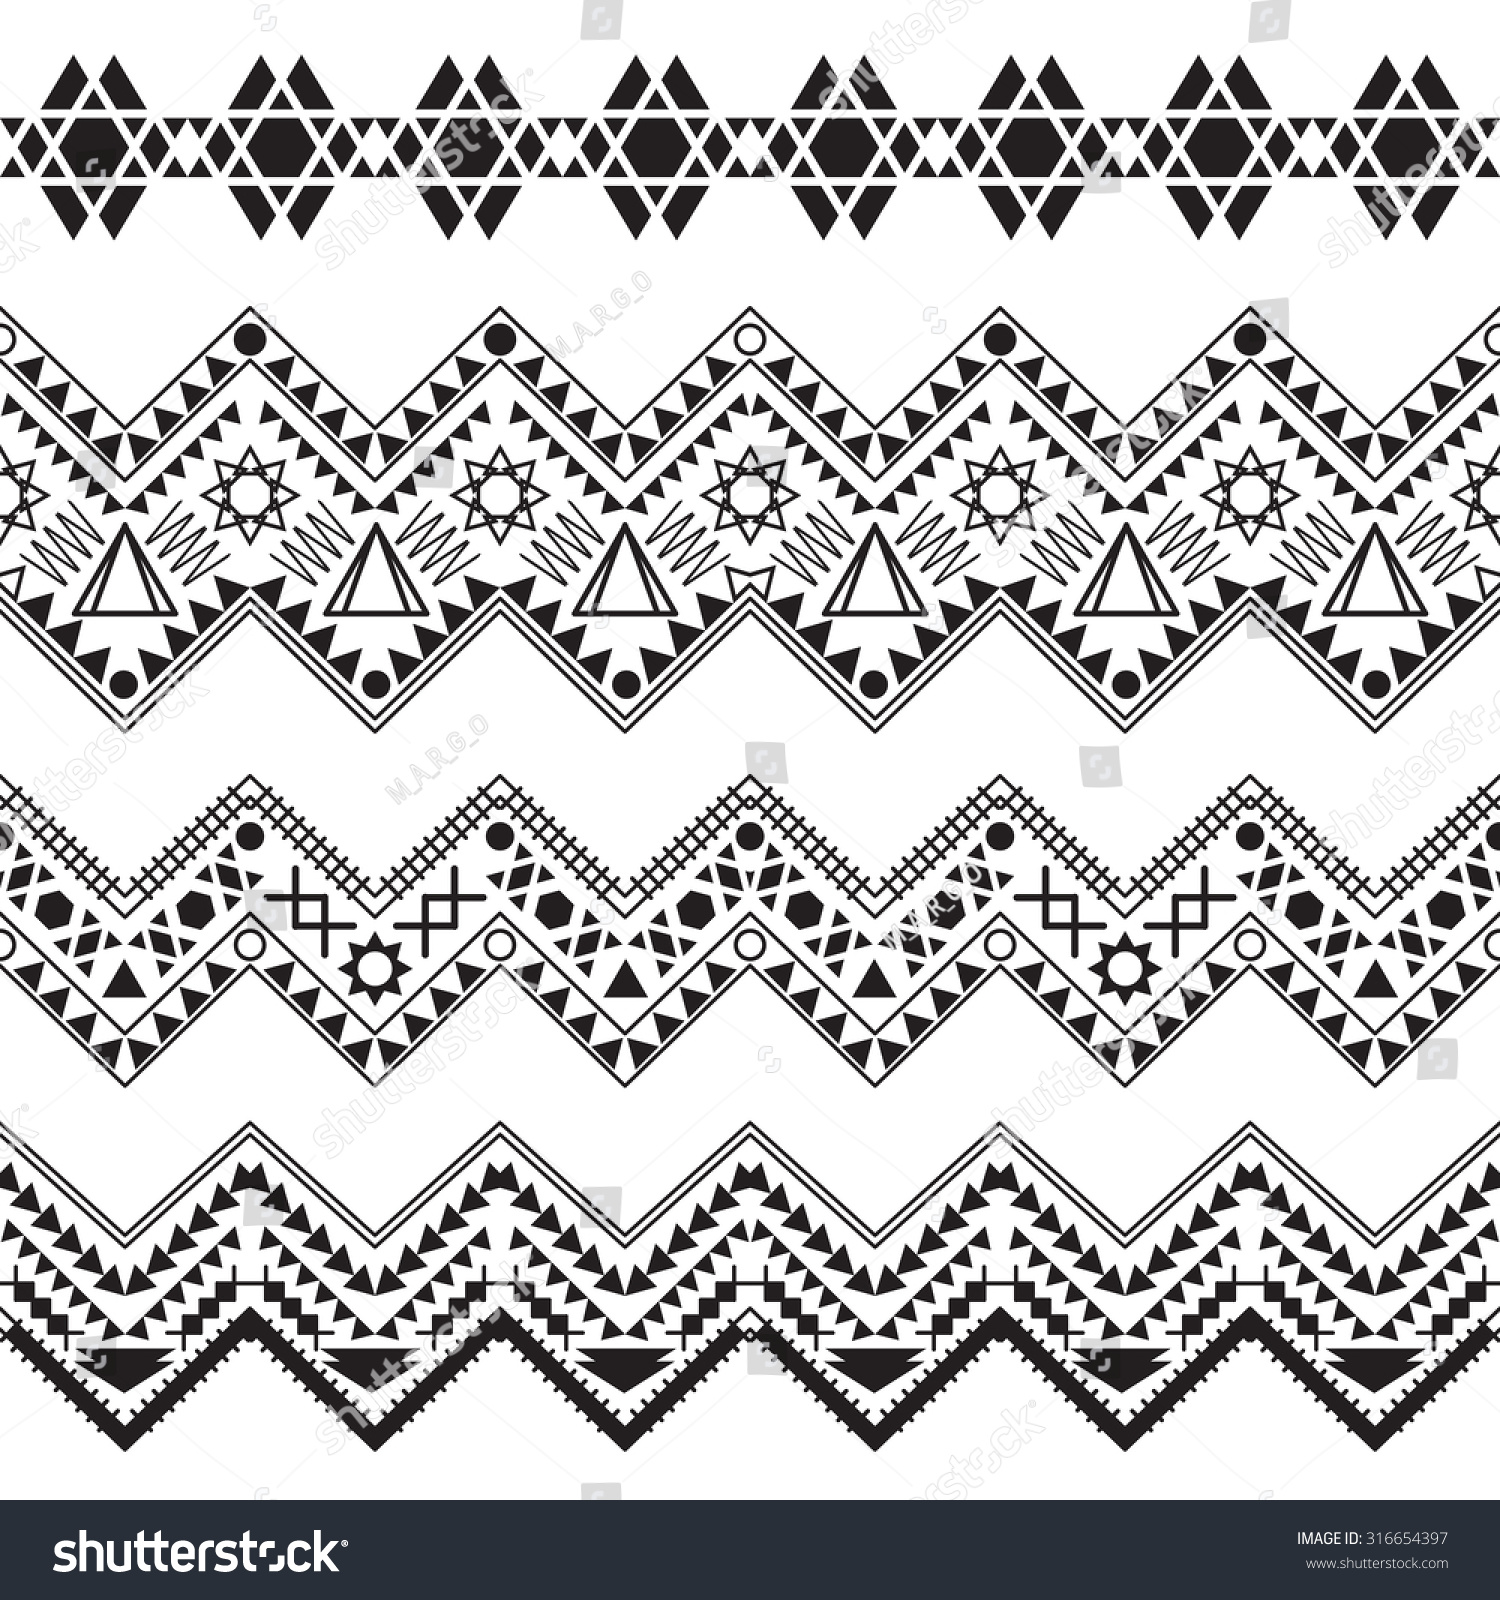 Collection Tribal Borders Vector Illustration Stock Vector (Royalty ...